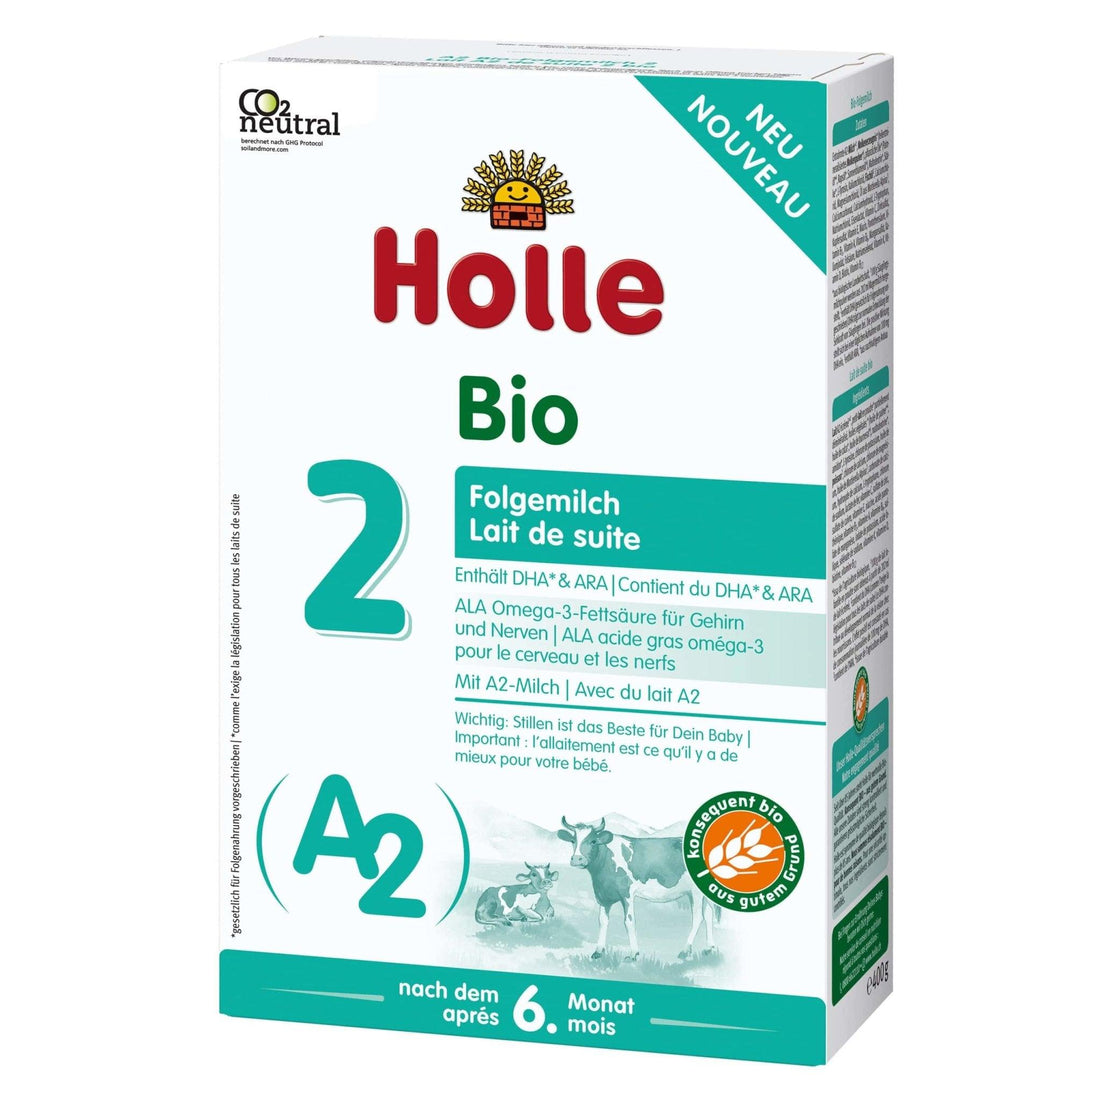 Holle A2 Formula Stage 2 (400g) - 6 - 10 Months